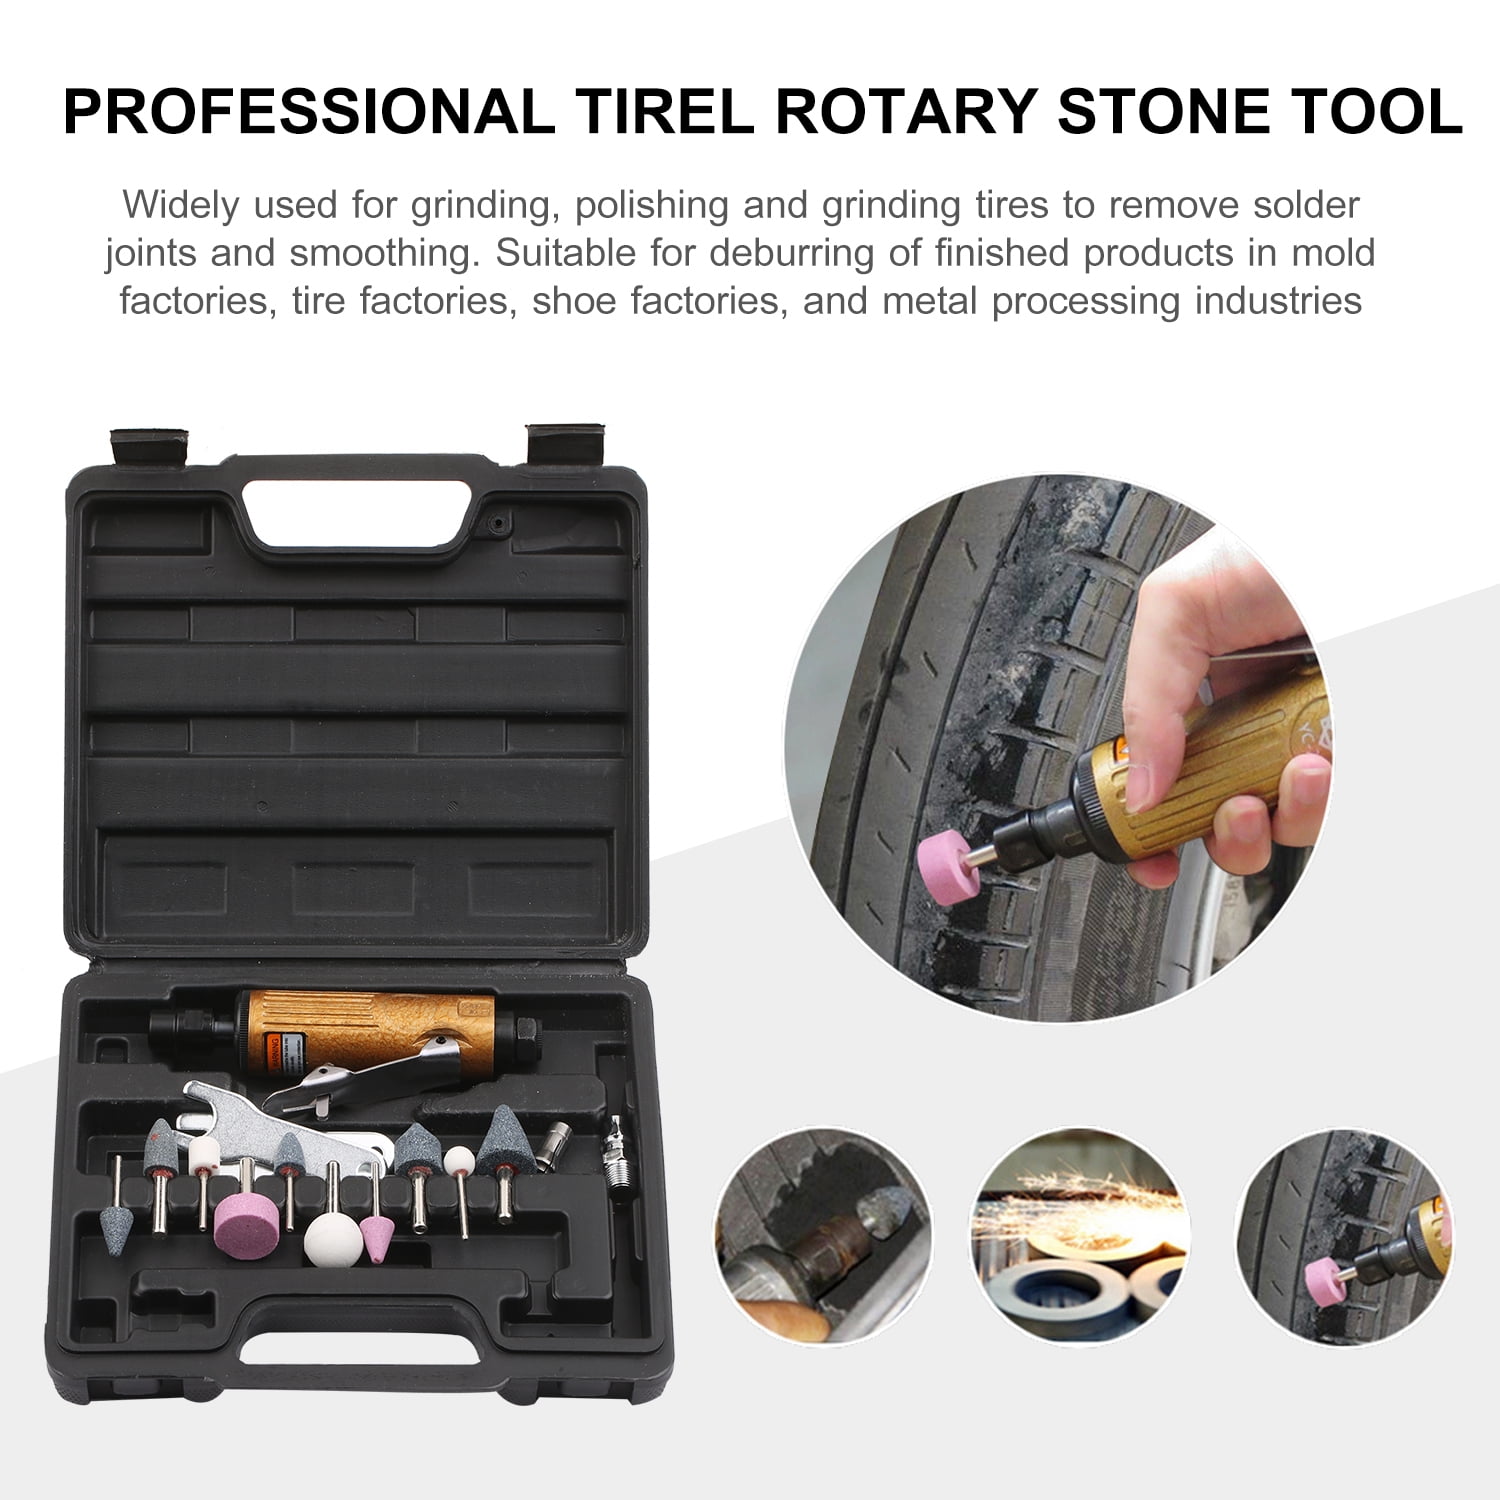 Details about   Air Die Grinder Kit Pneumatic Straight Mini Polisher Cutter Rotary Tool Set T1R5 